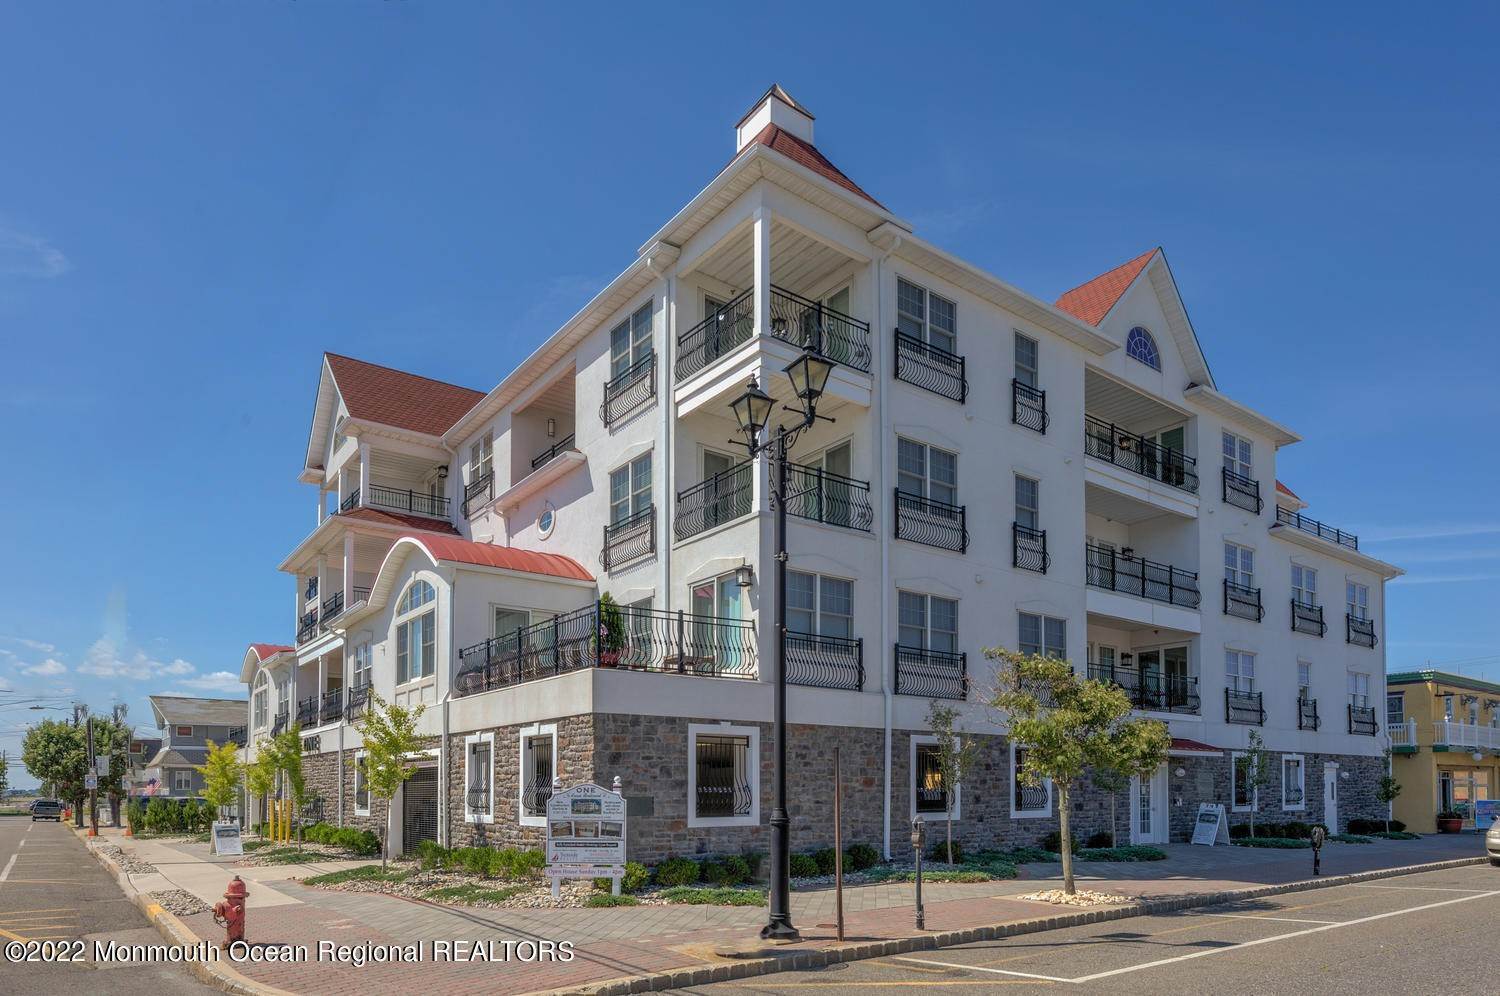 Single Family Homes for Sale at 1 Boulevard D Seaside Heights, New Jersey 08751 United States